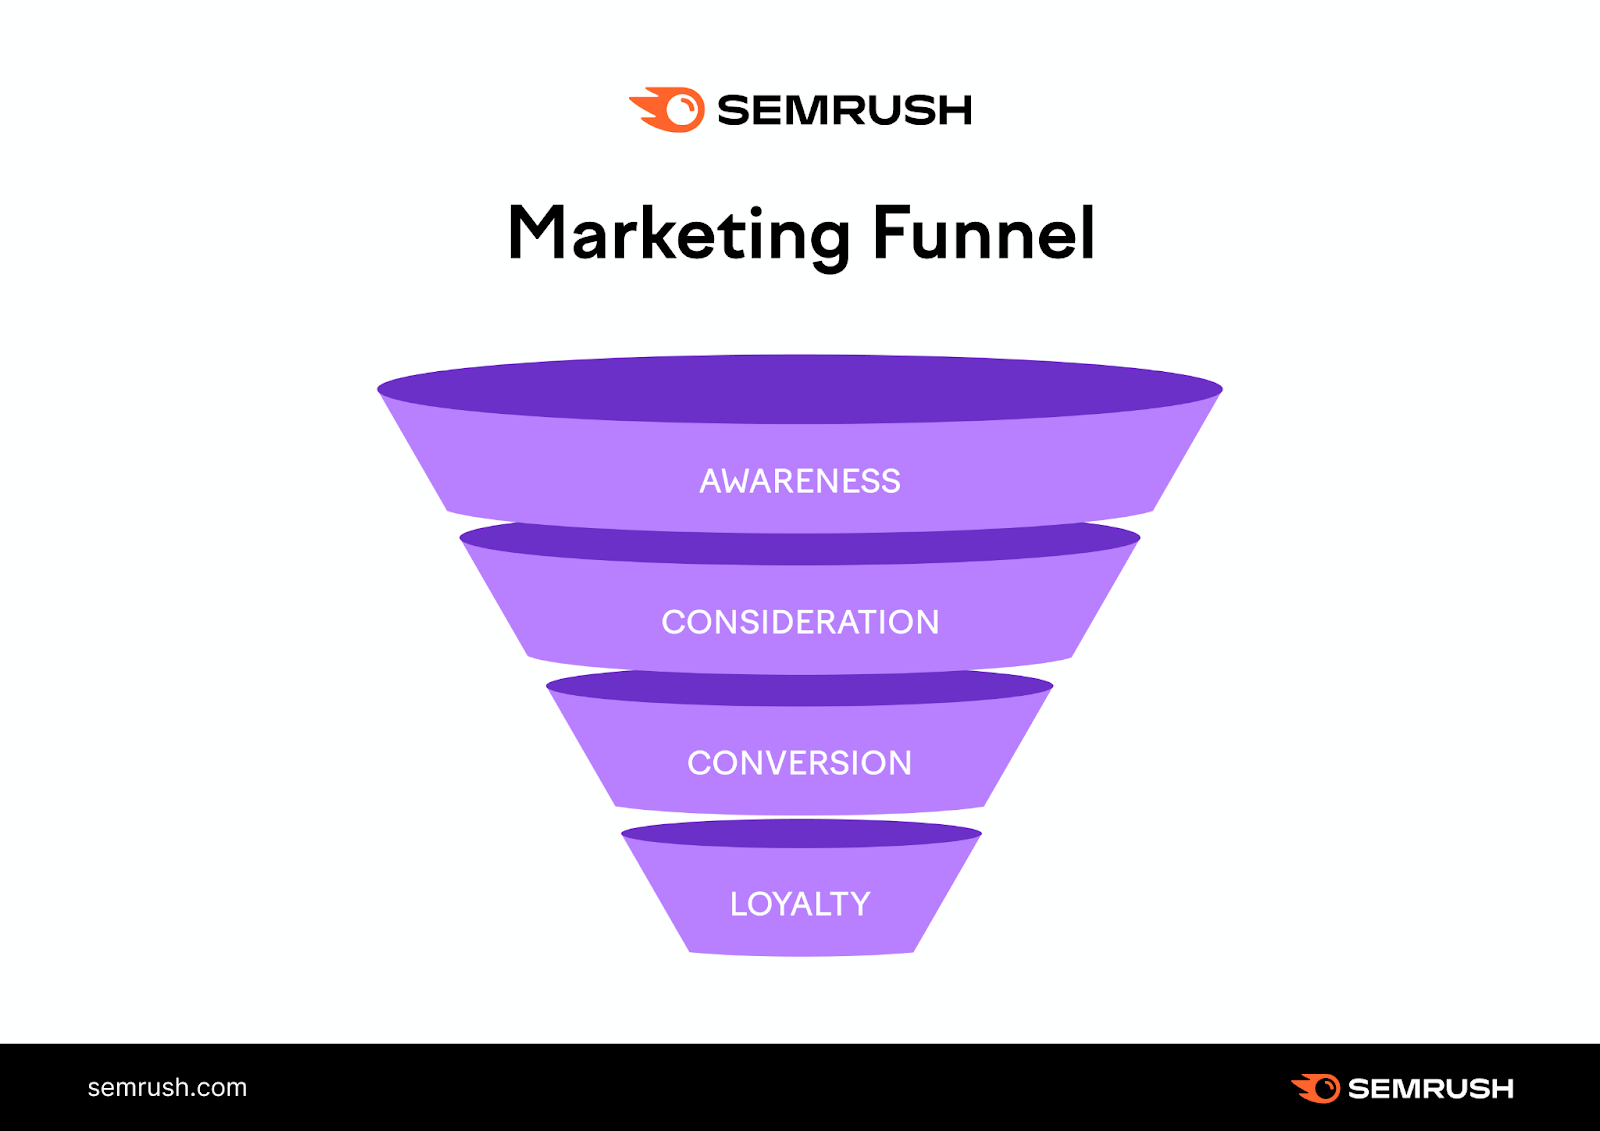 A ocular  of selling  funnel, with awareness, consideration, conversion, and loyalty stages